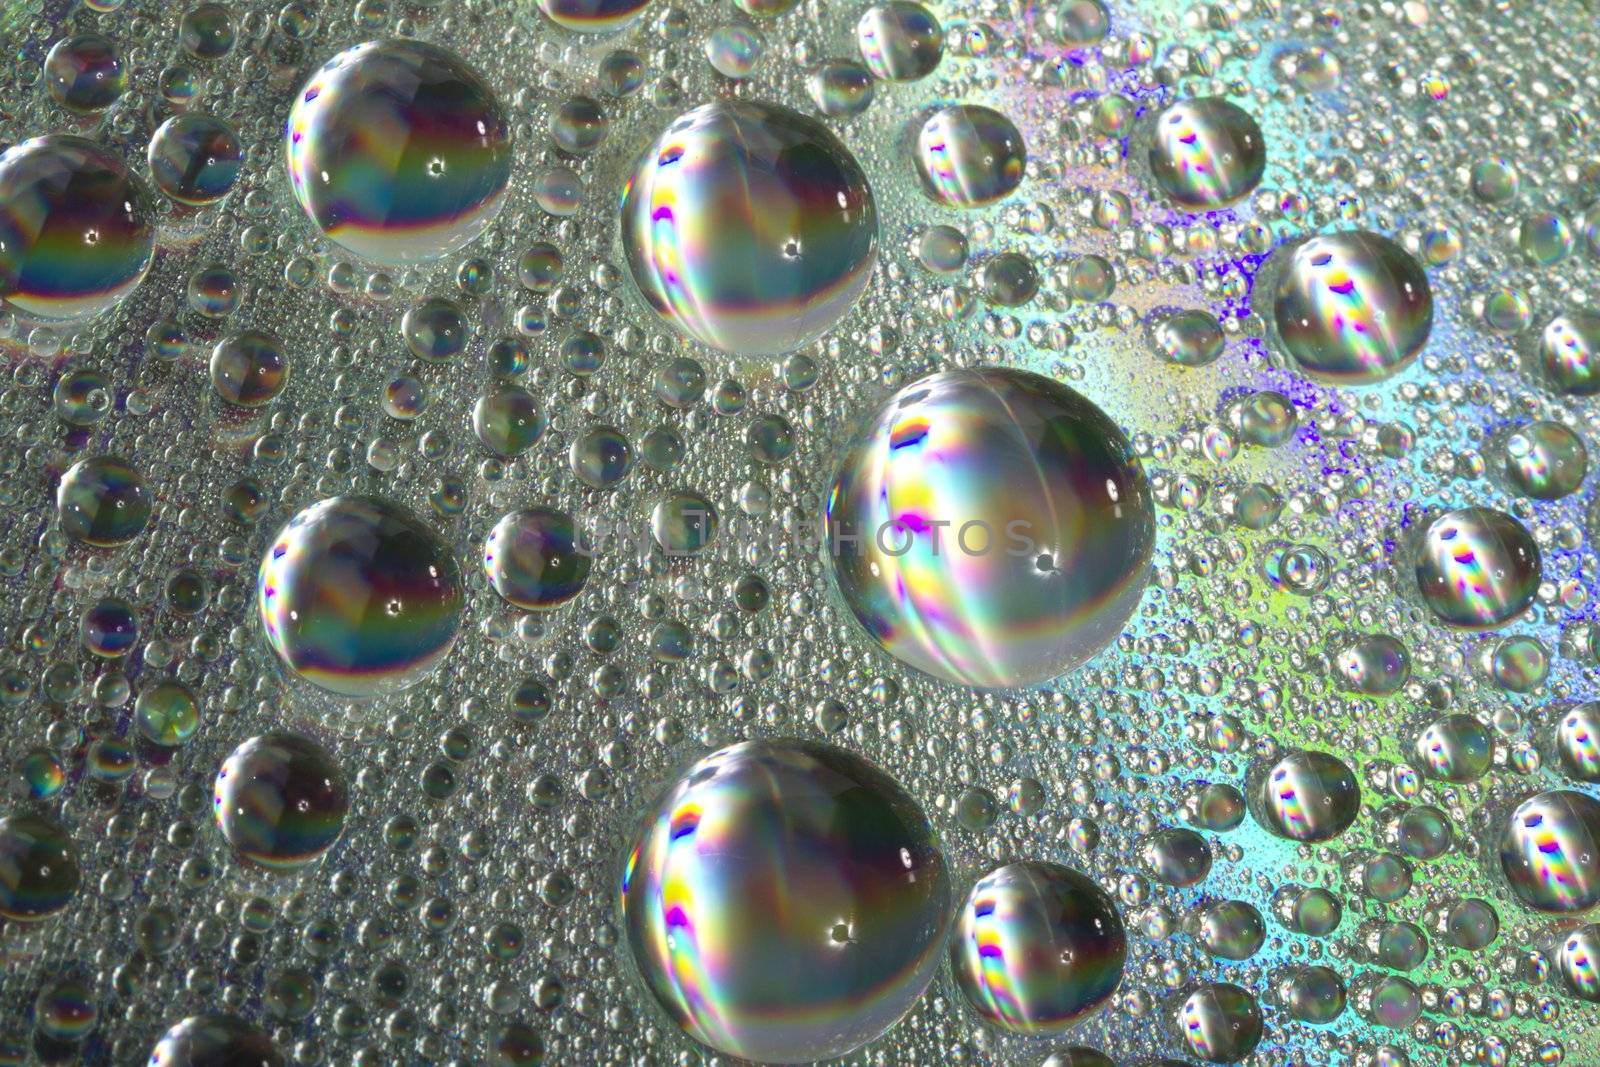 Close up view of many colorful and bright drops of water on a shiny surface.